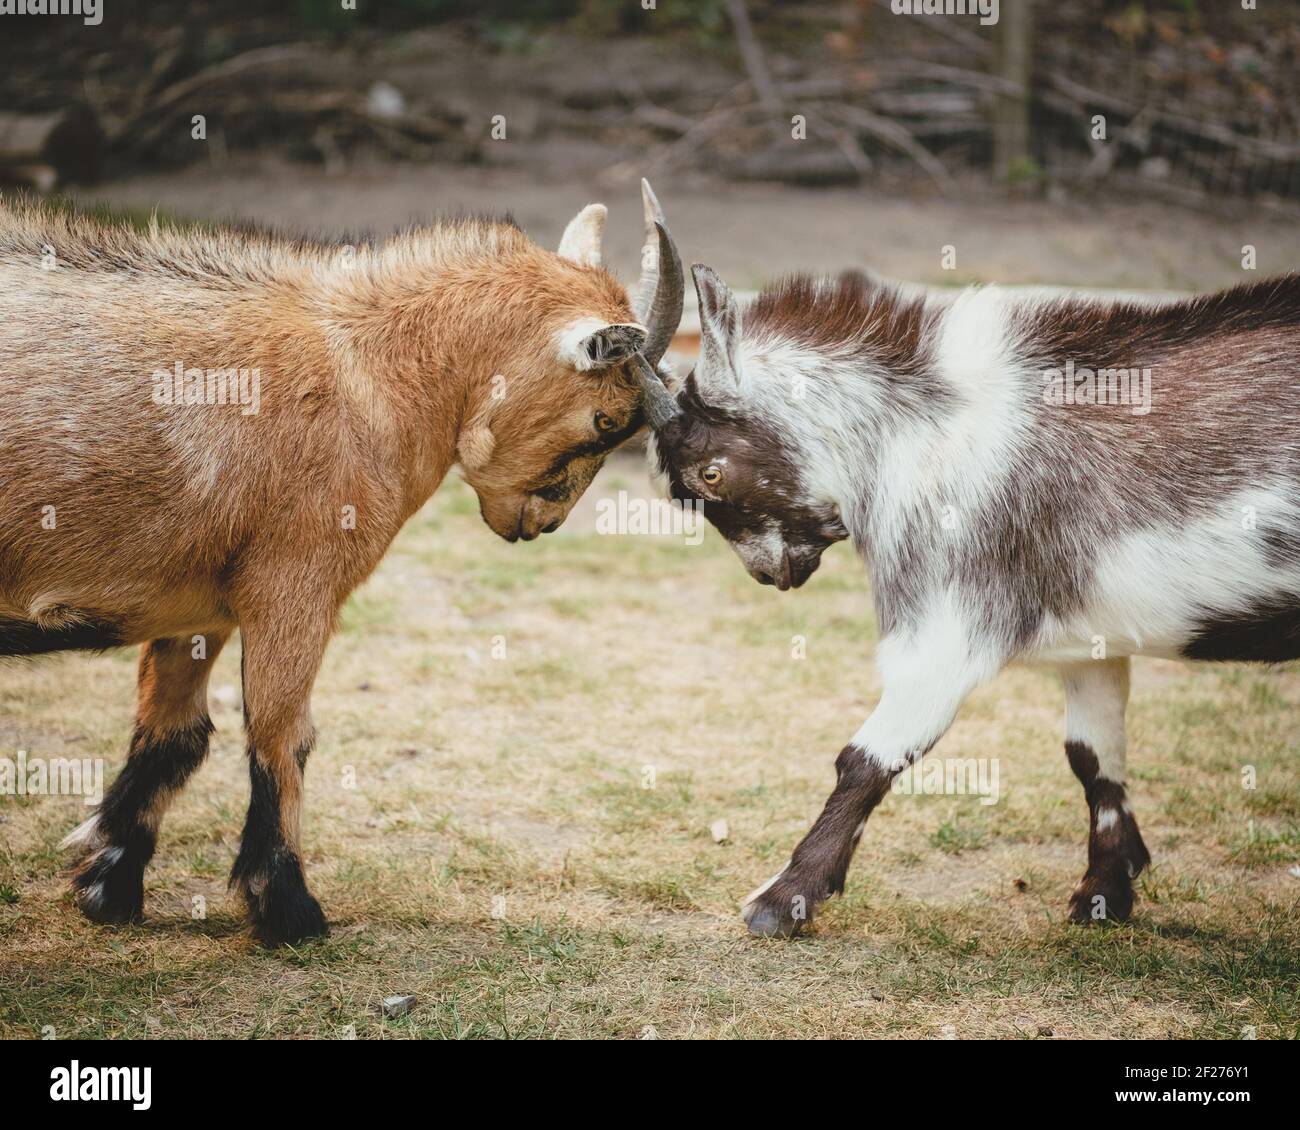 Two young goats locking horns as they play Stock Photo